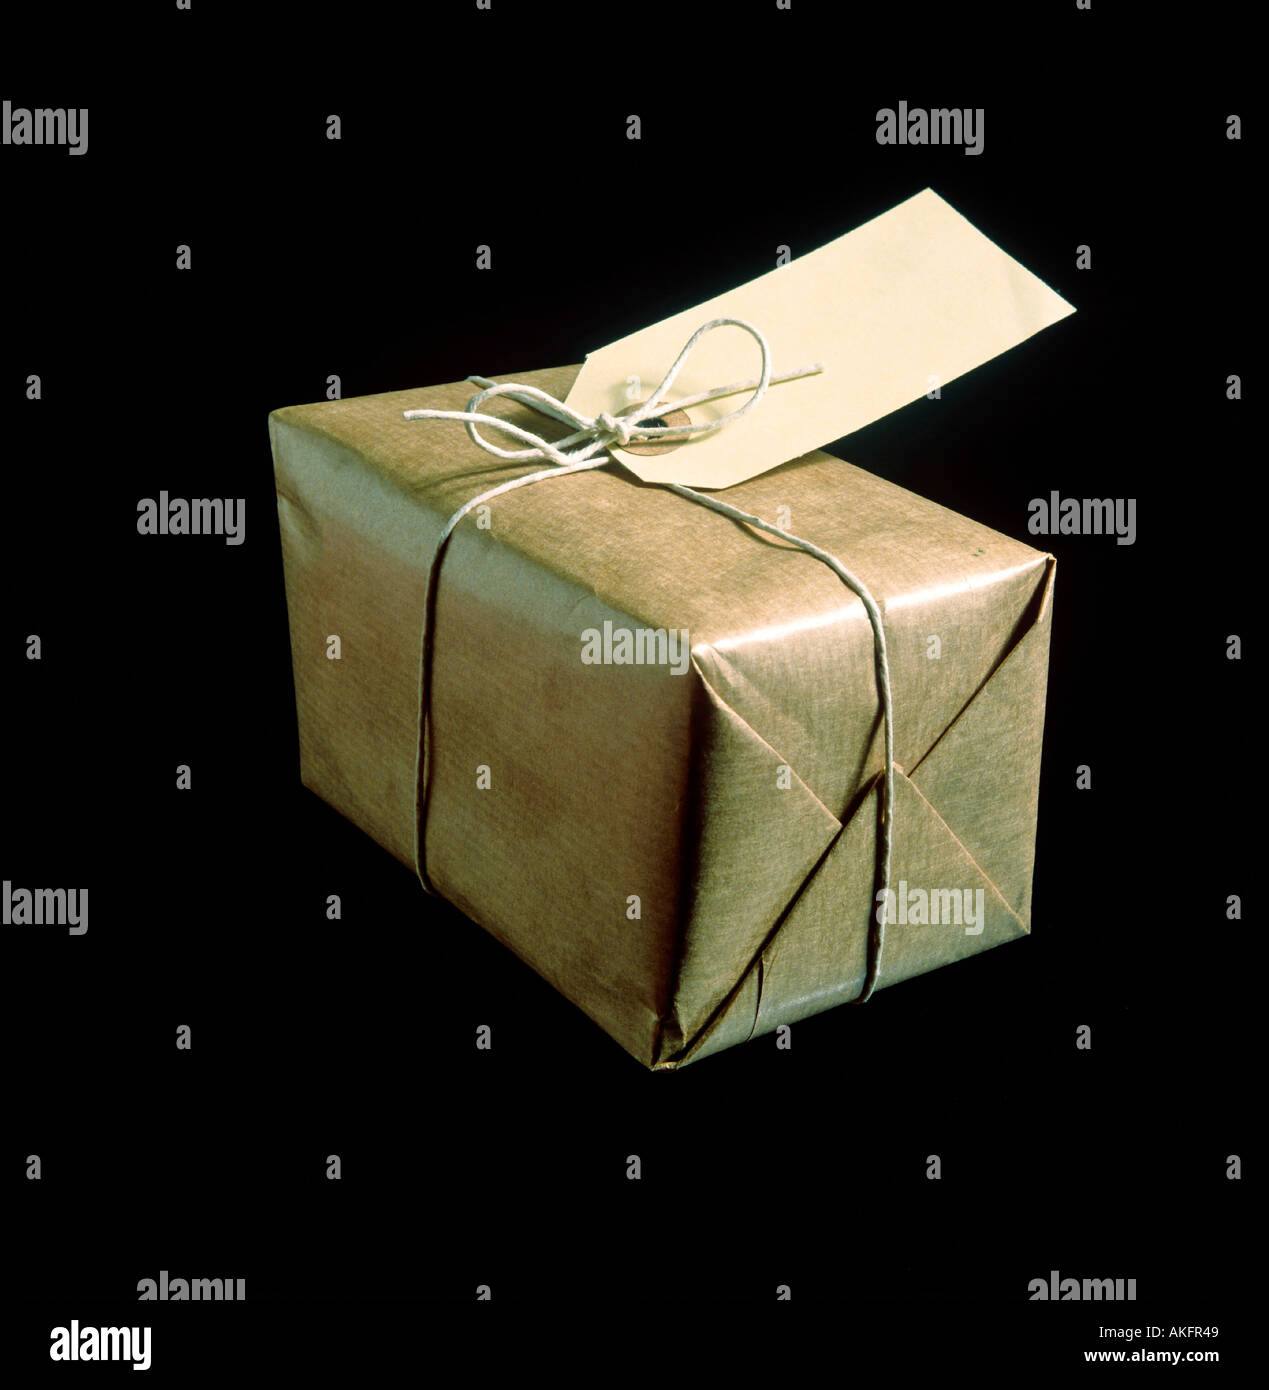 parcel wrapped in packing paper editorial use only Stock Photo